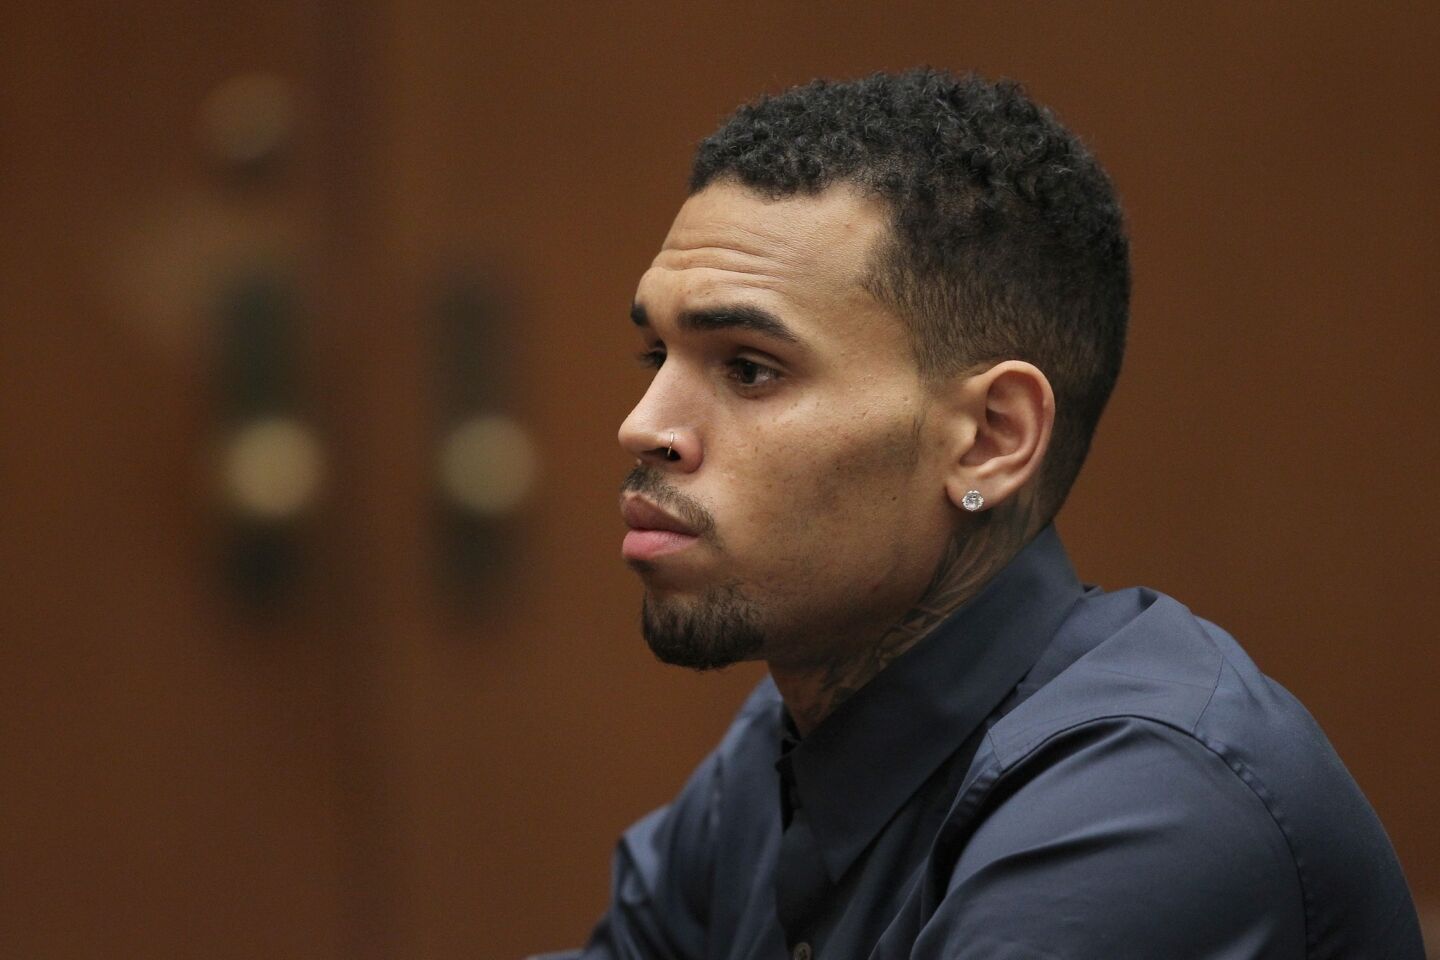 At a probation hearing in November 2013 related to his 2009 conviction of assaulting Rihanna, Chris Brown was ordered by a judge to rehab for 90 days at an inpatient facility approved by officials.